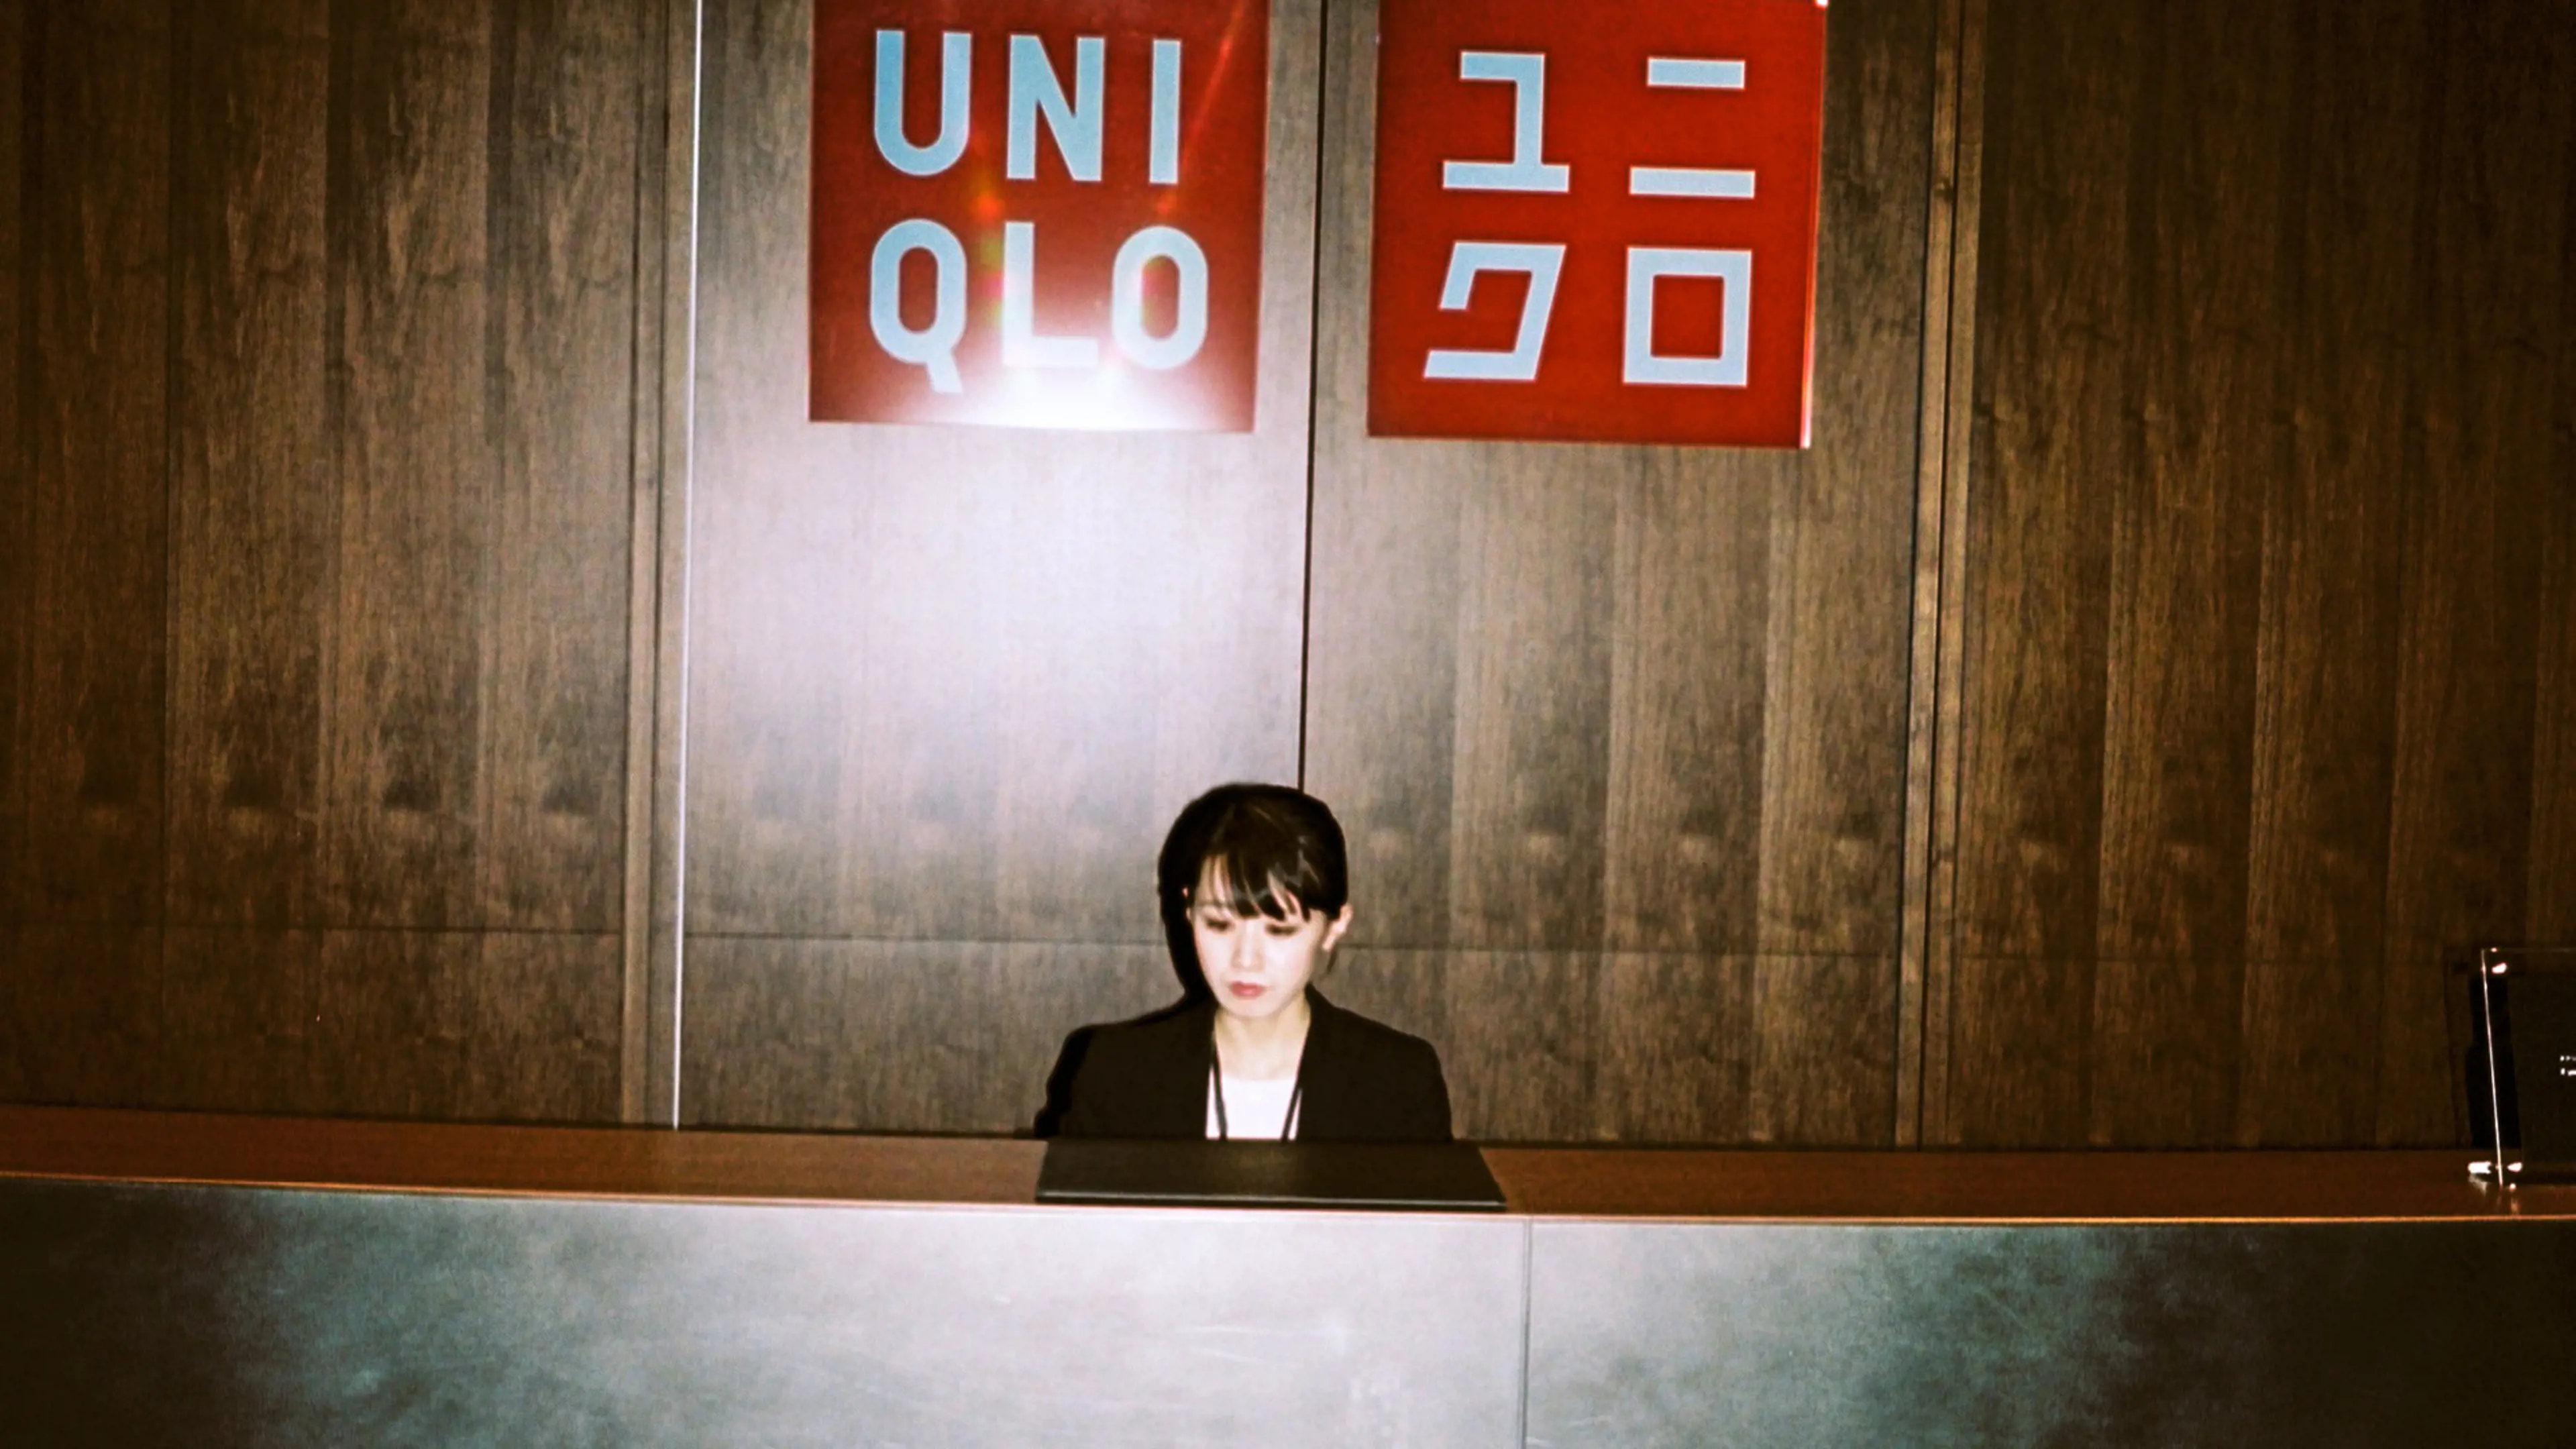 A receptionist at Uniqlo's offices